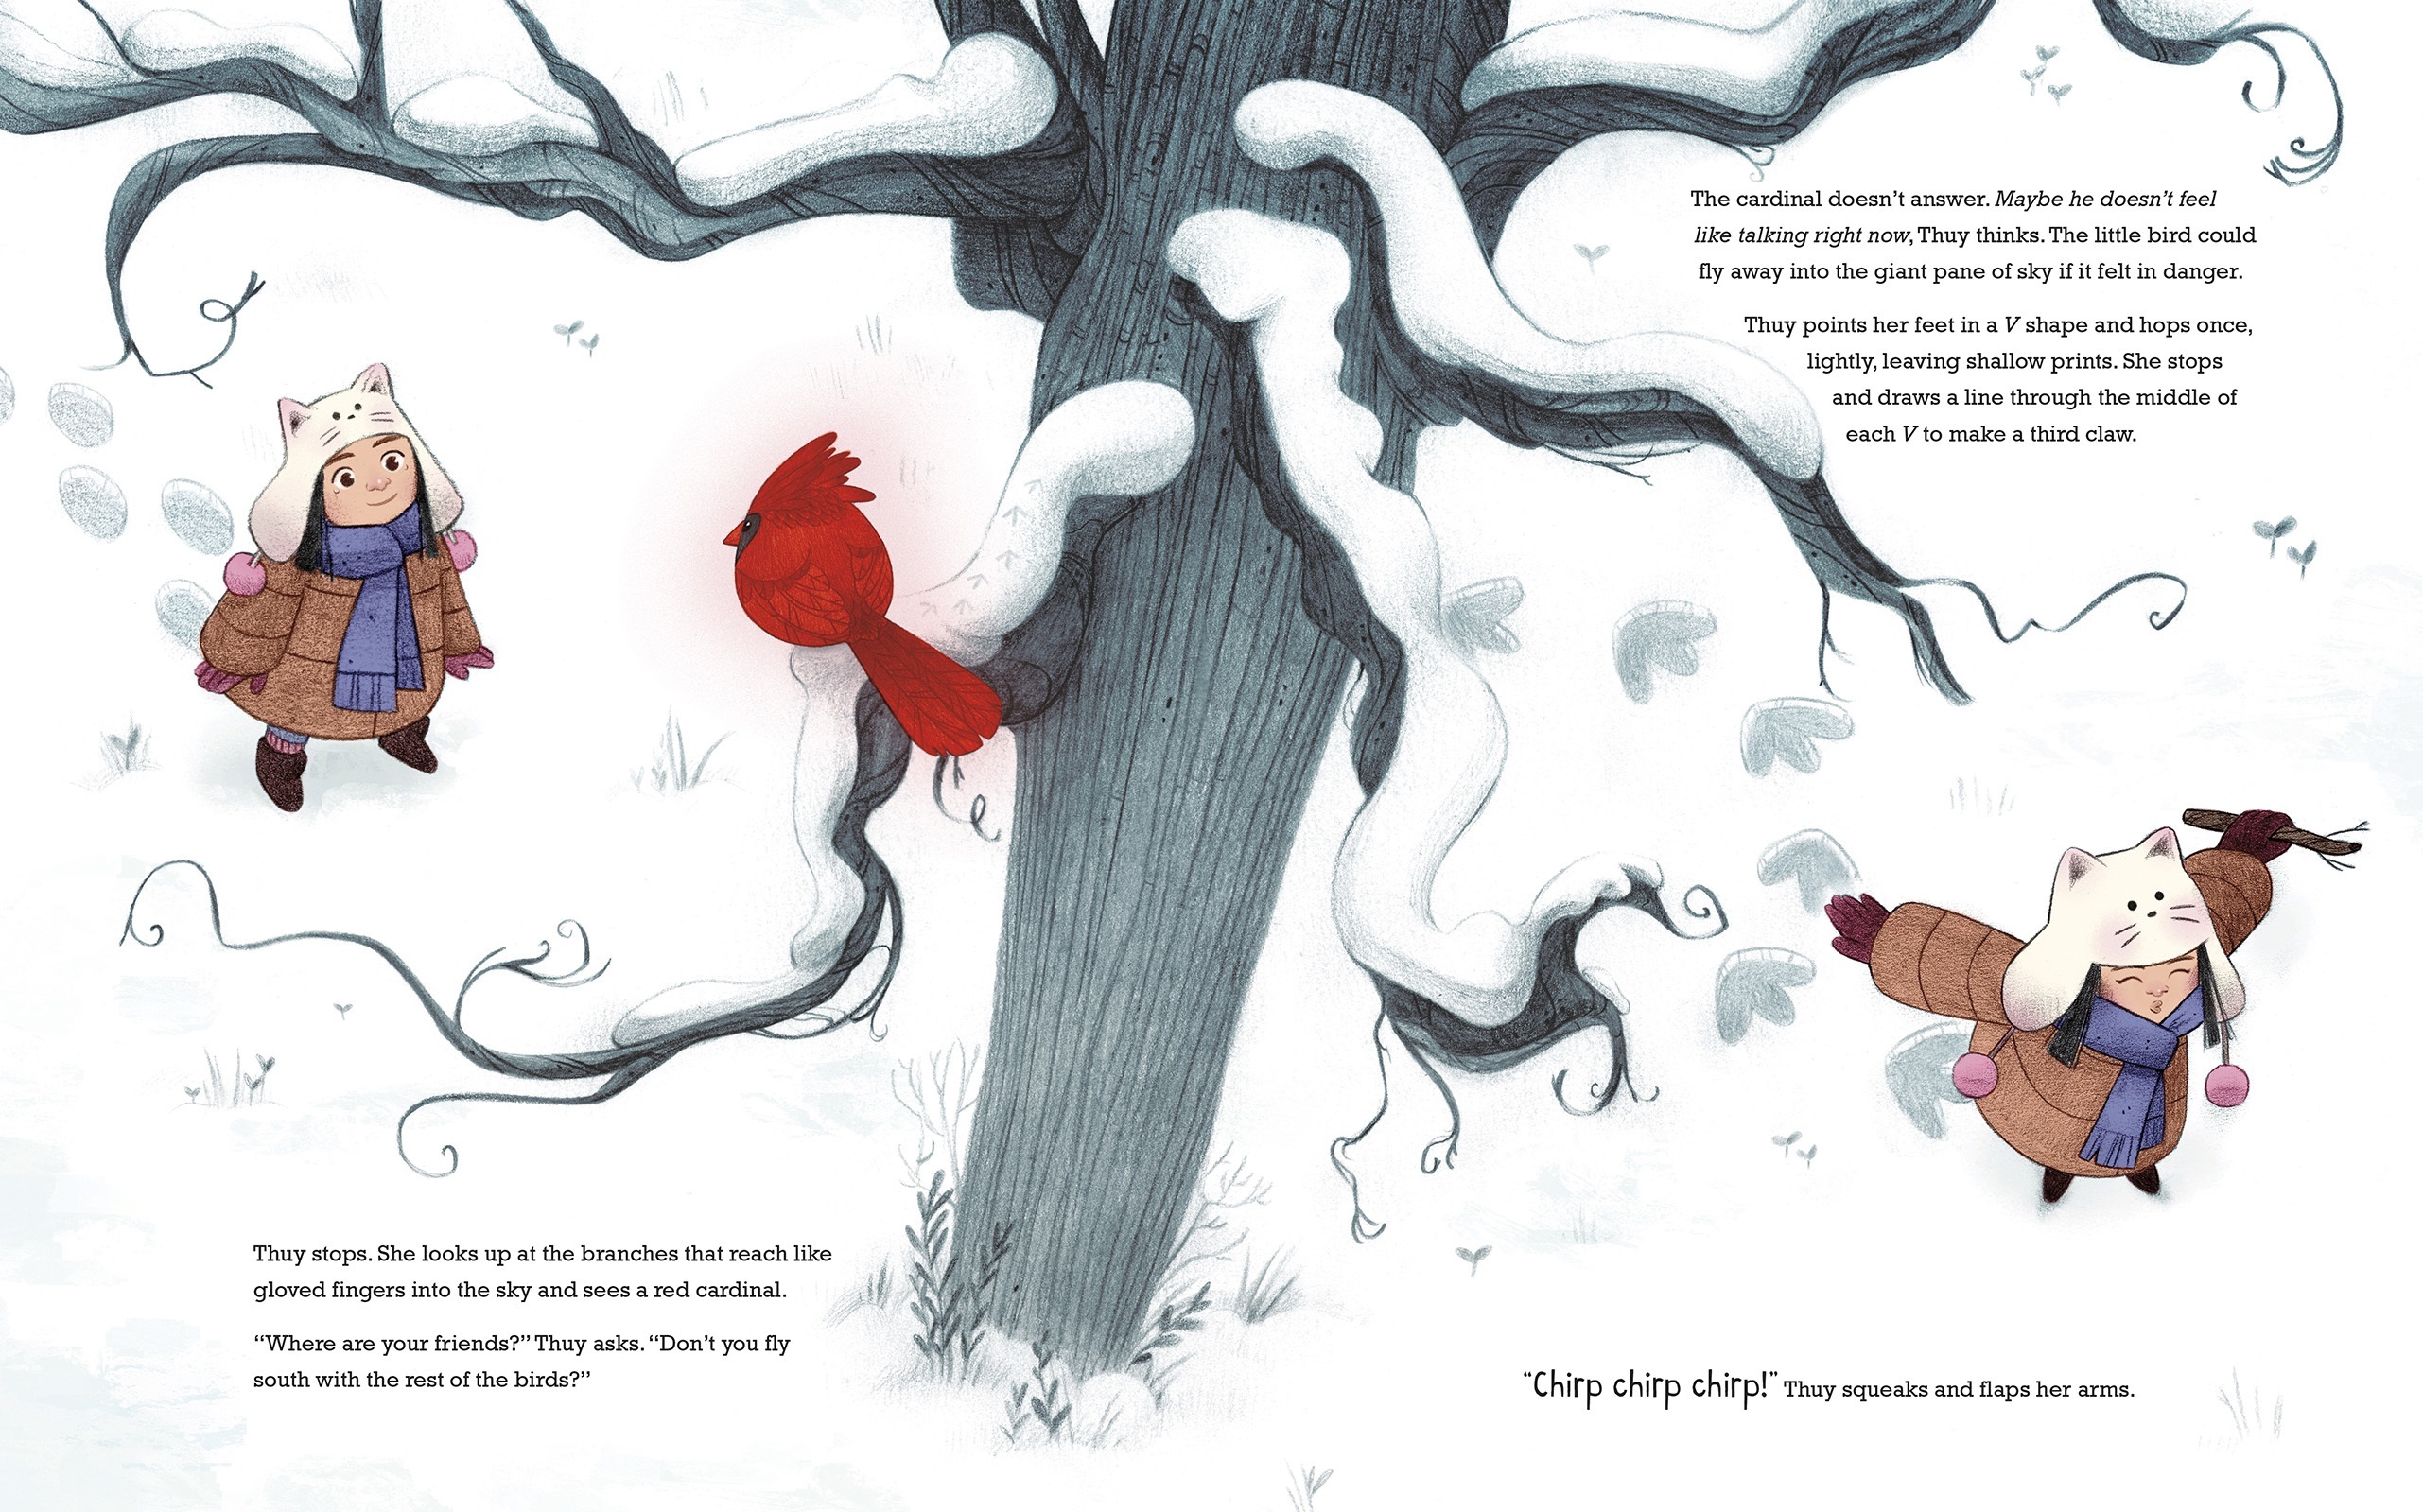 My Footprints by Bao Phi, illustrated by Basia Tran. ©Capstone Editions